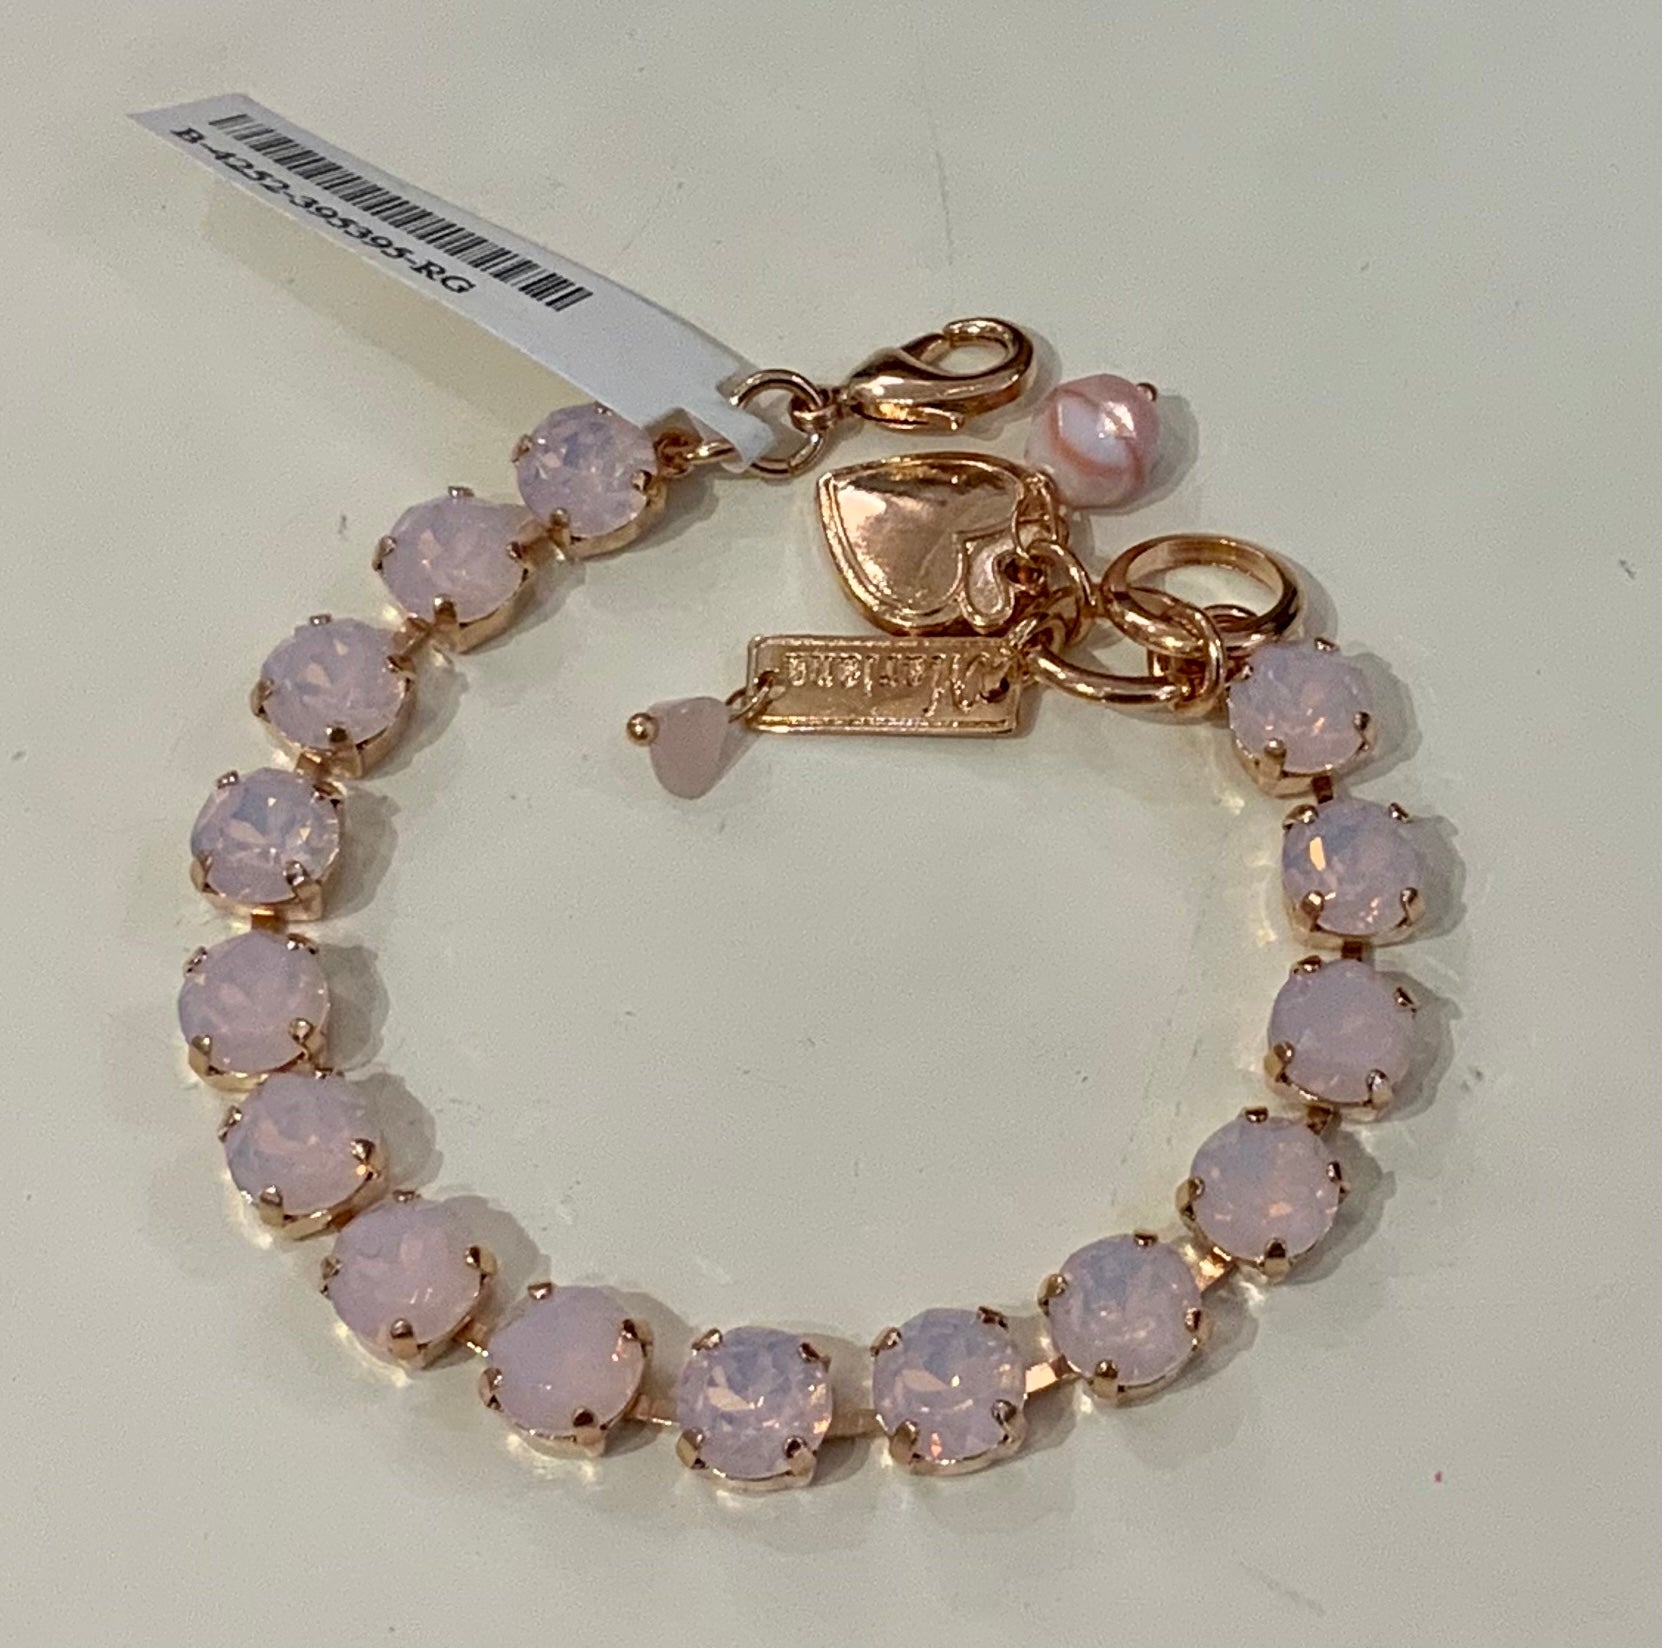 Mariana Rose Gold Must-Have Everyday Crystal Bracelet in "Pink Opal"